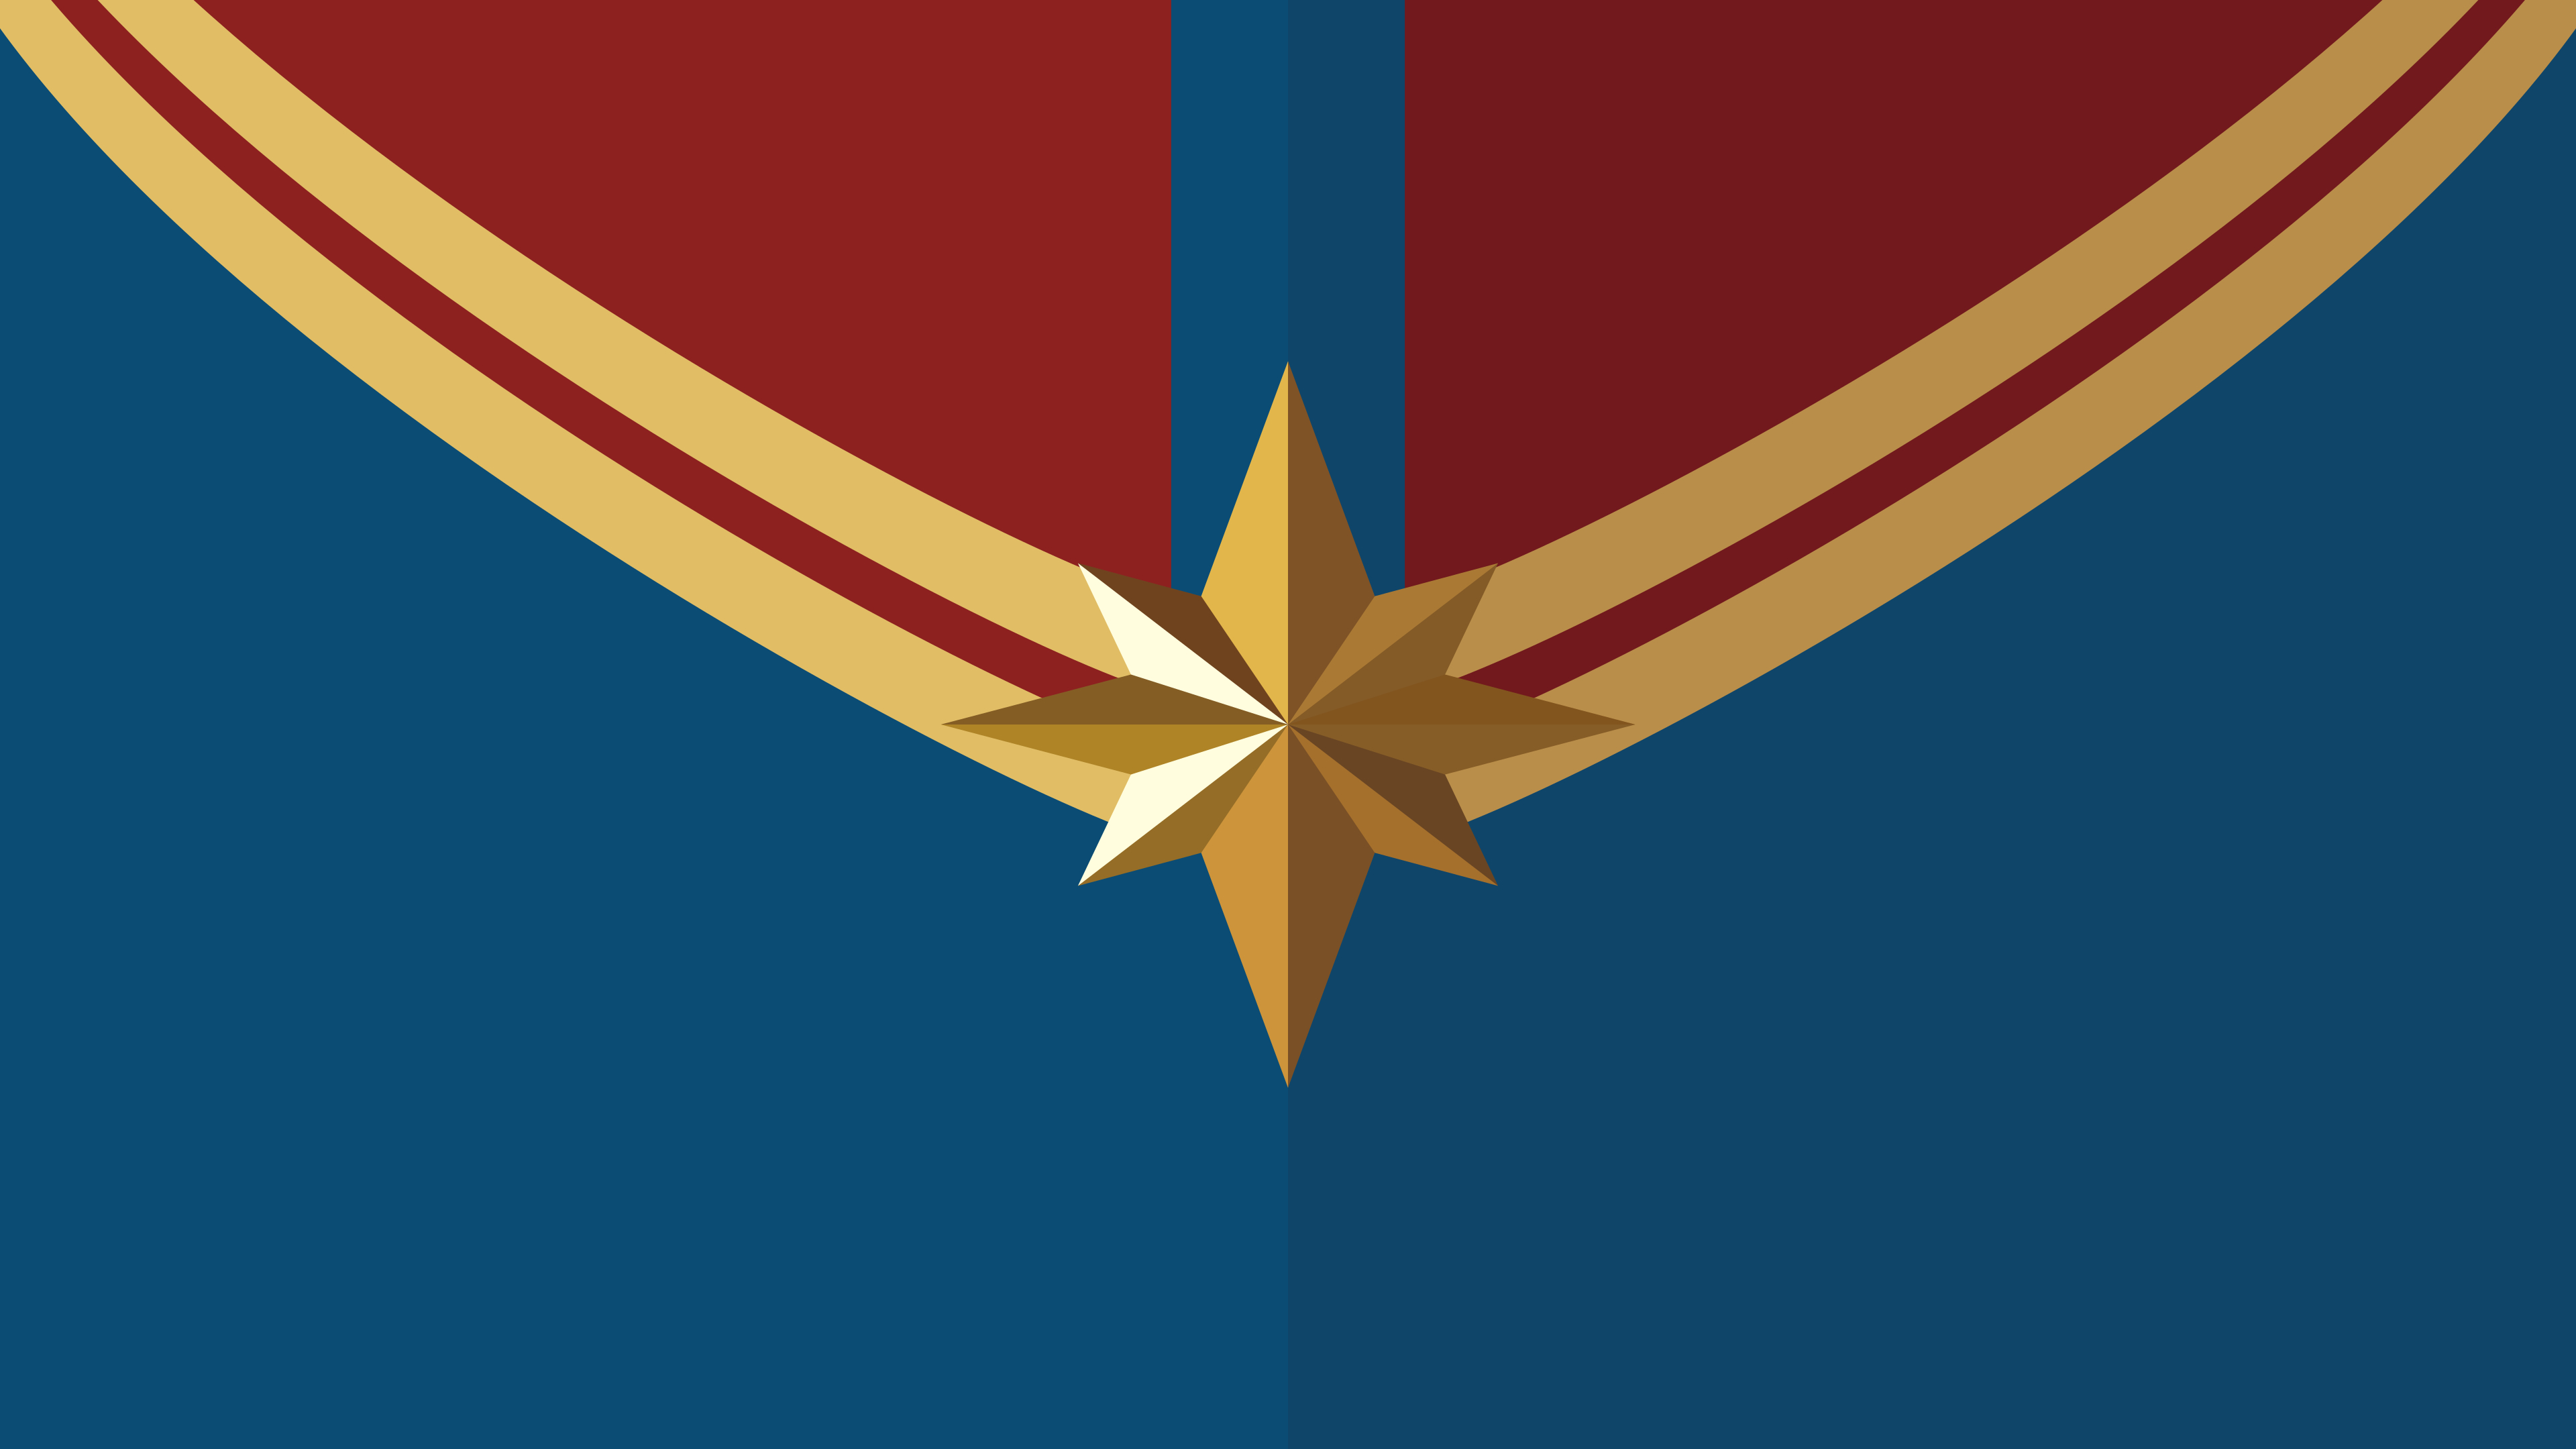 3840x Captain Marvel Logo 4k 3840x Resolution Wallpaper Hd Movies 4k Wallpapers Images Photos And Background Wallpapers Den